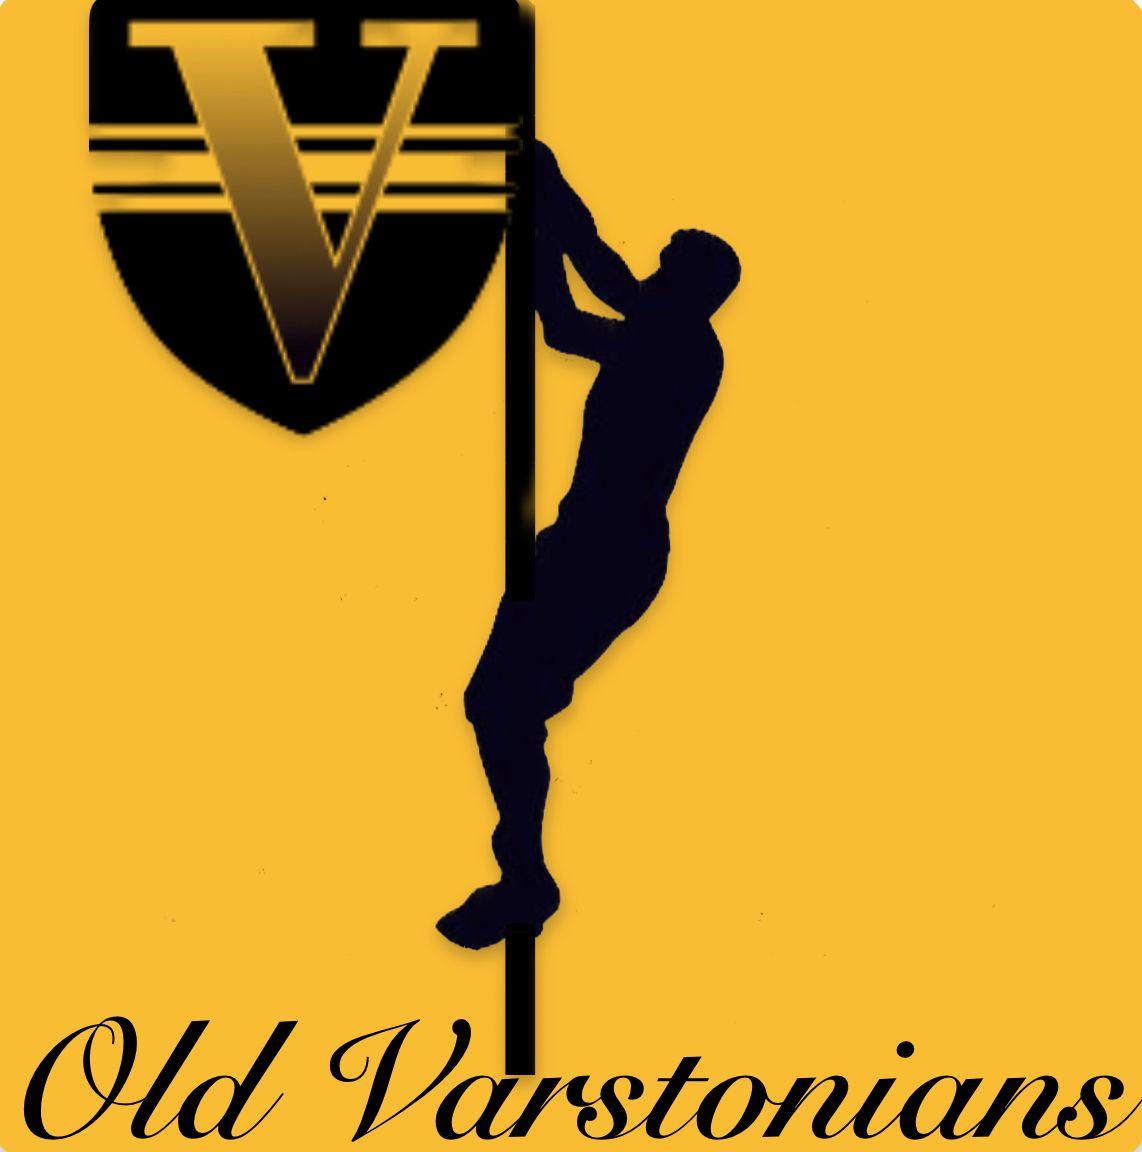 Old Varstonians Day